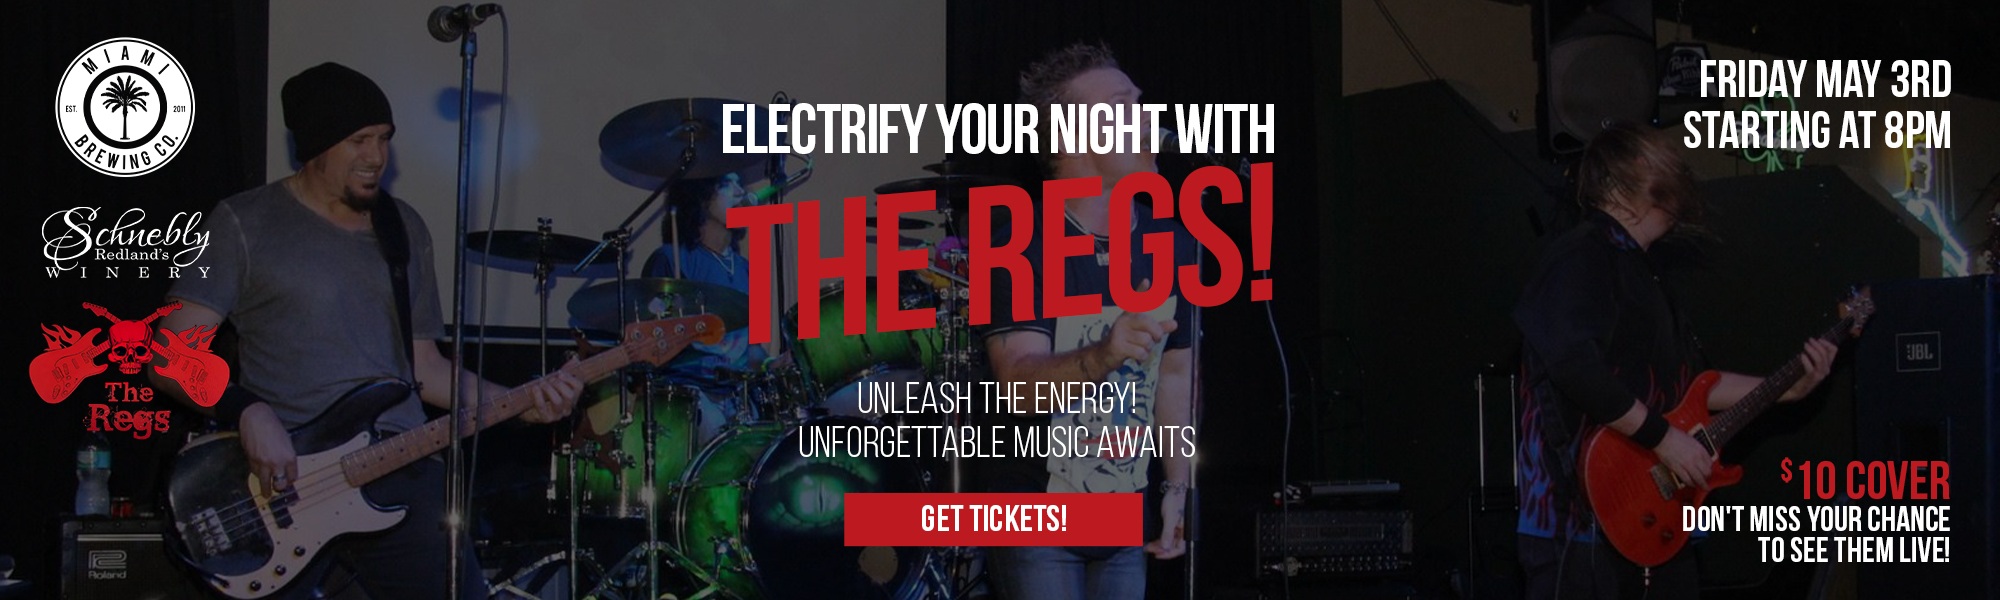 Electrify your night with the regs!